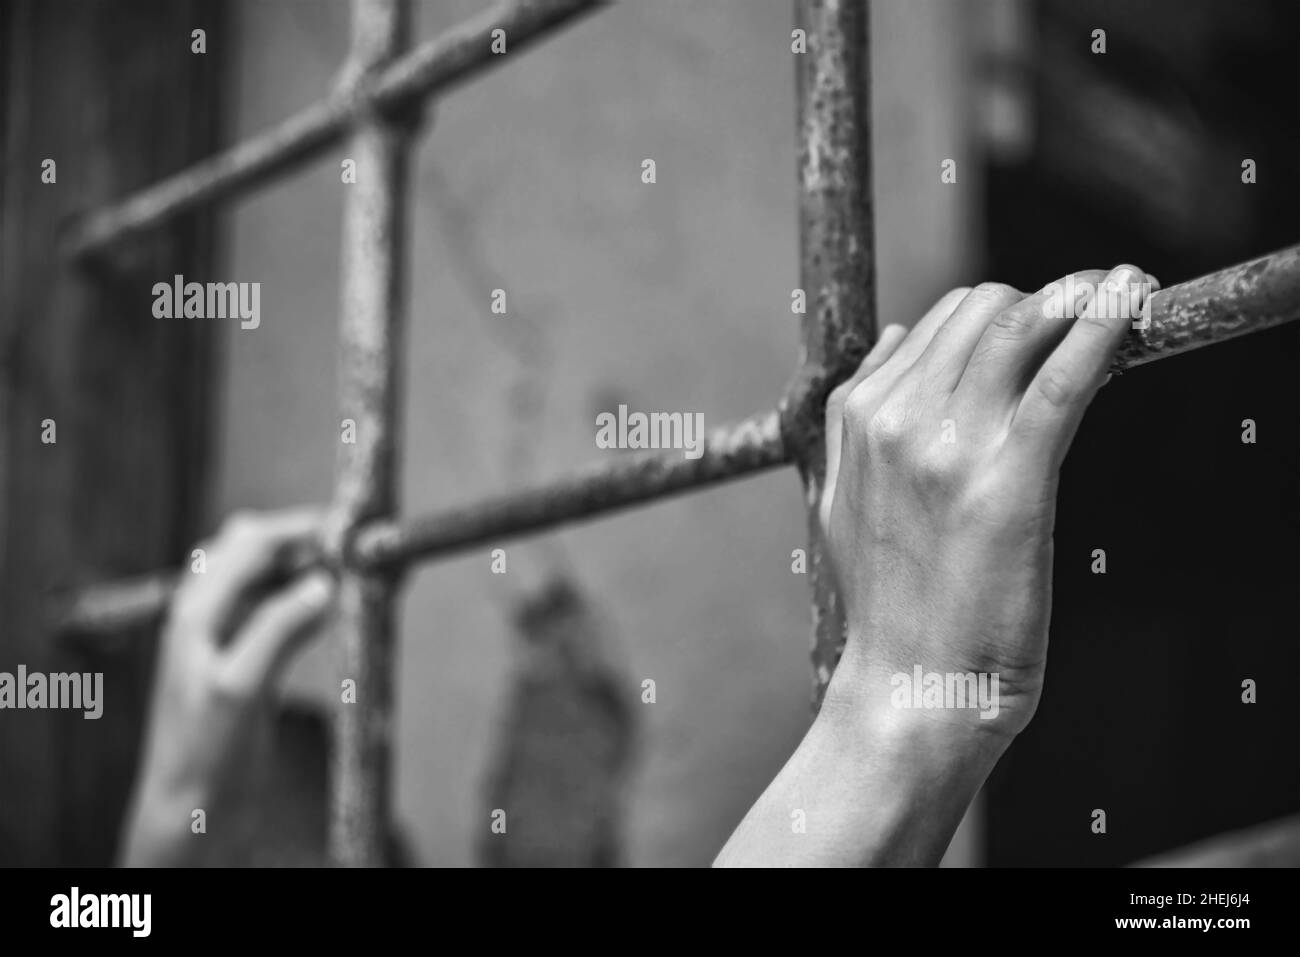 Hands of a young person holds ancient iron fencing, close up, black and white photography Stock Photo